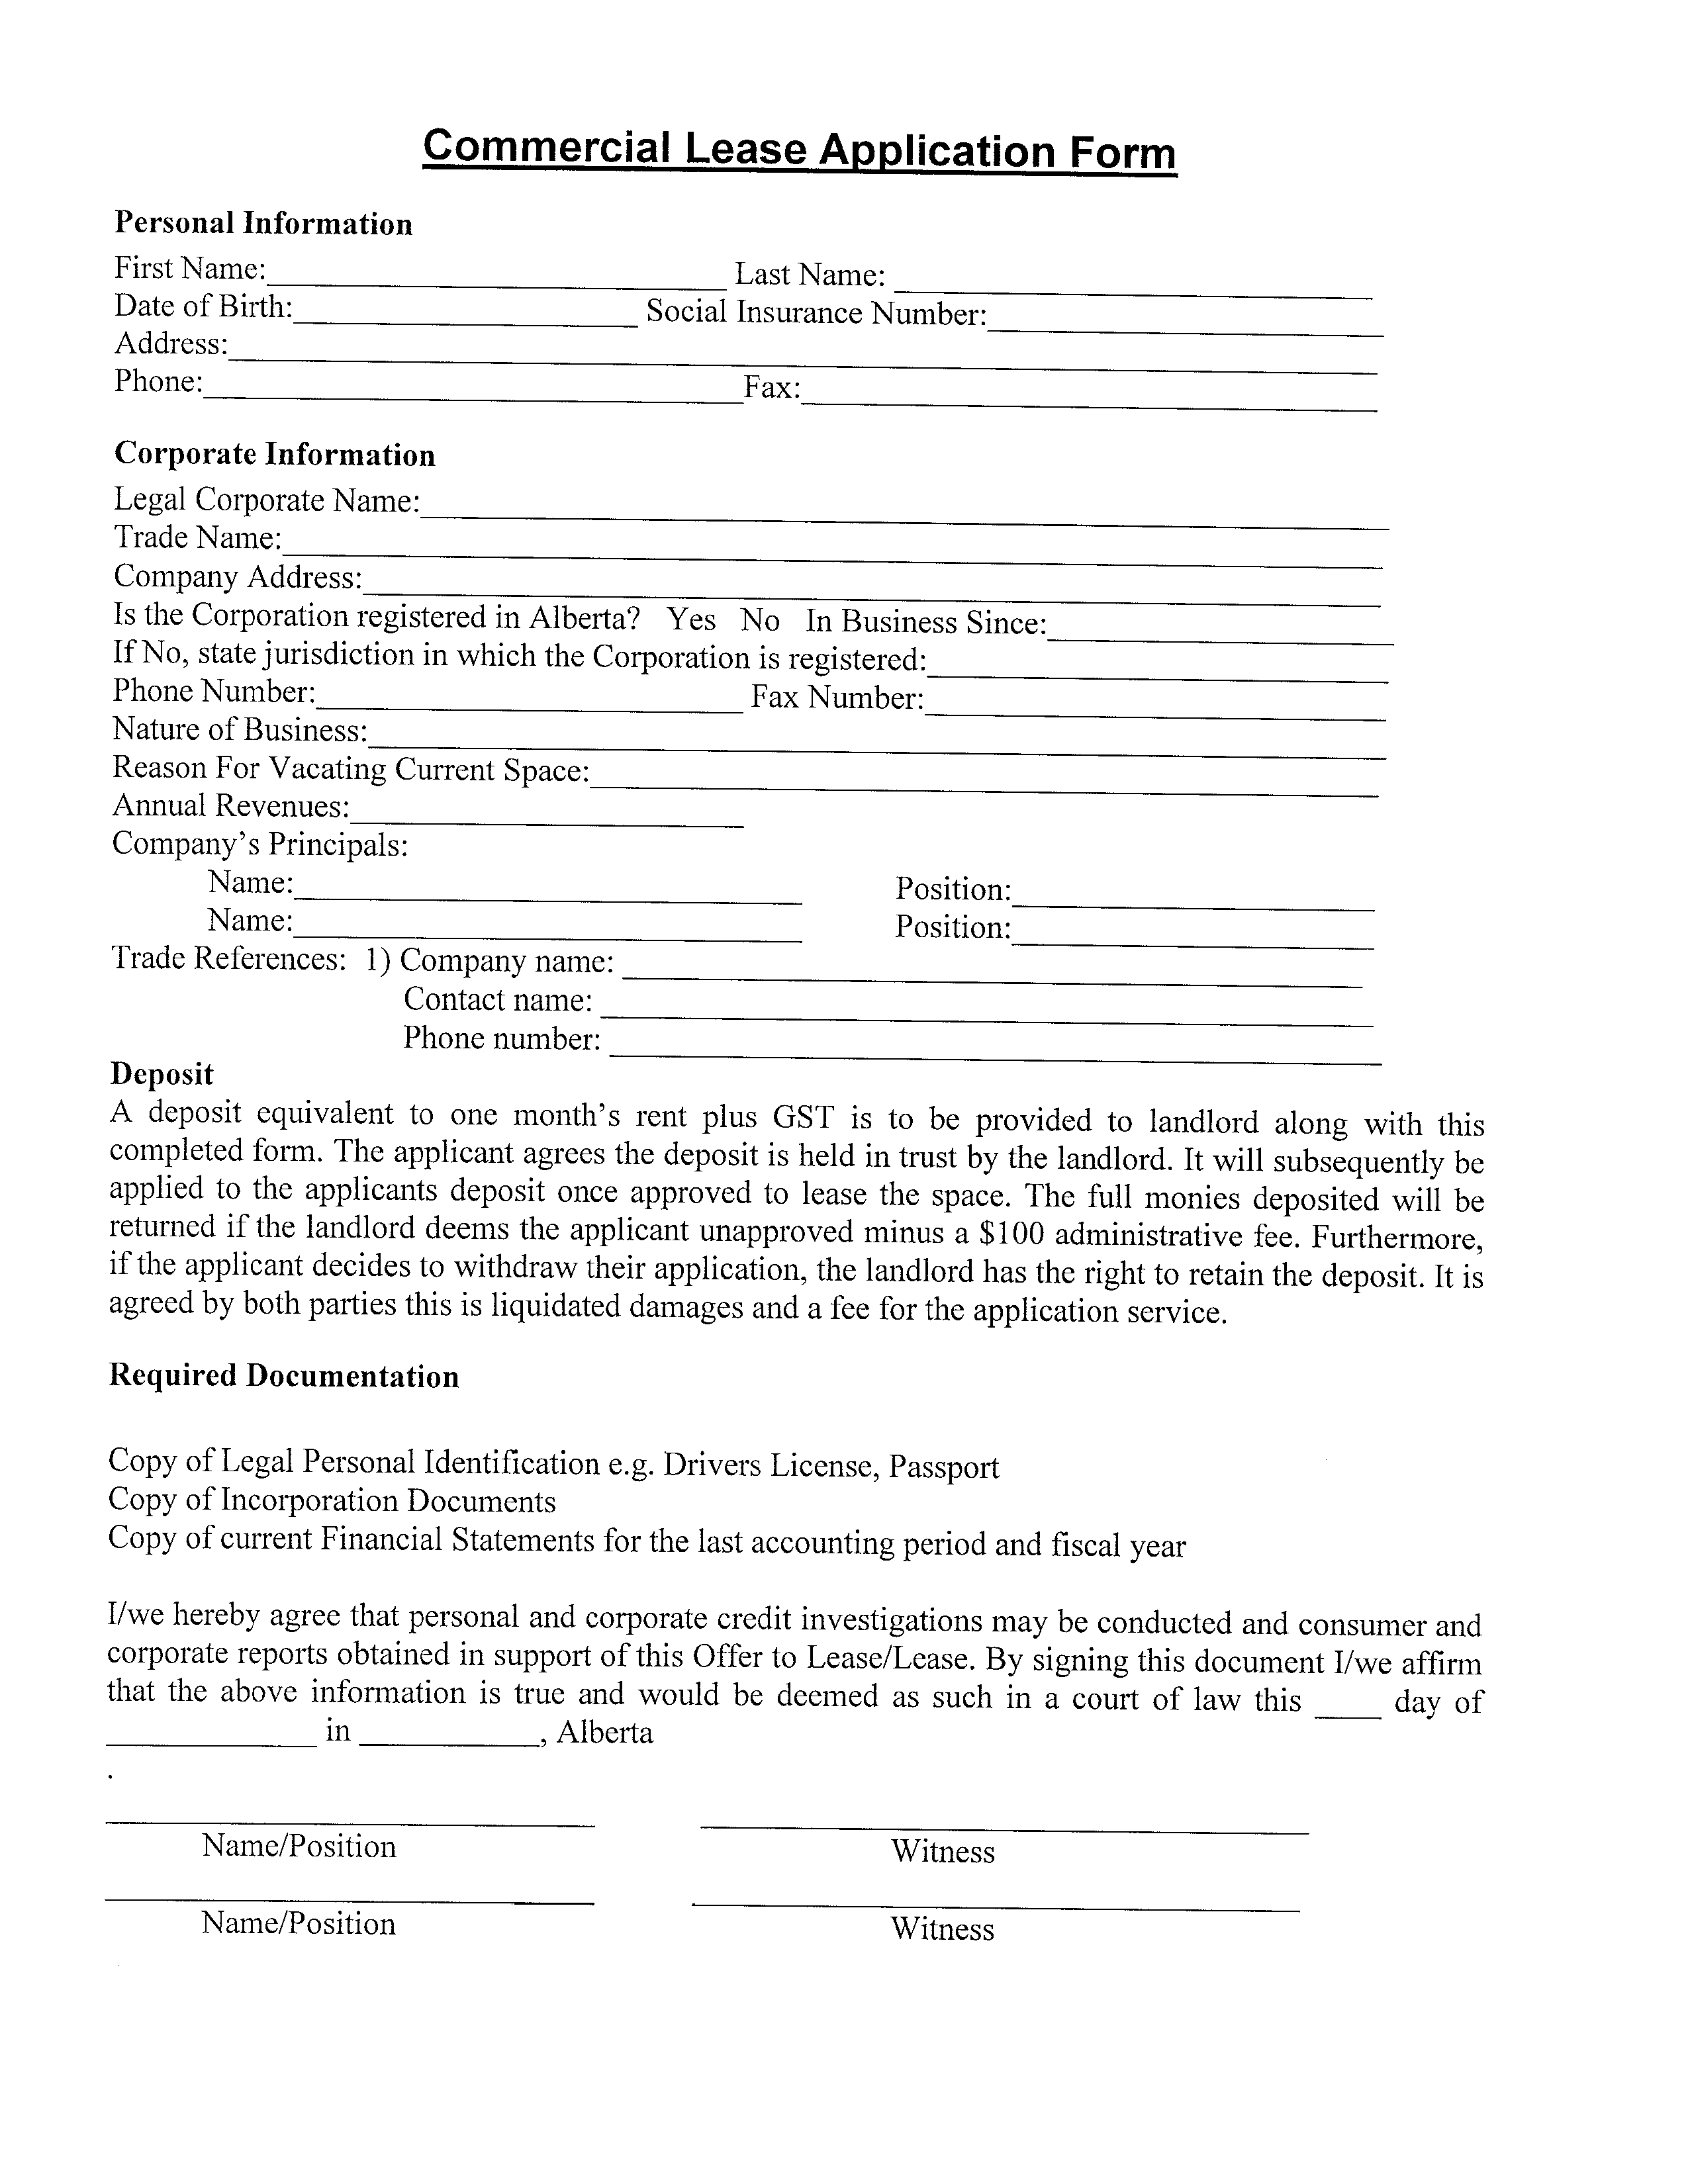 blank commercial lease application form templates at